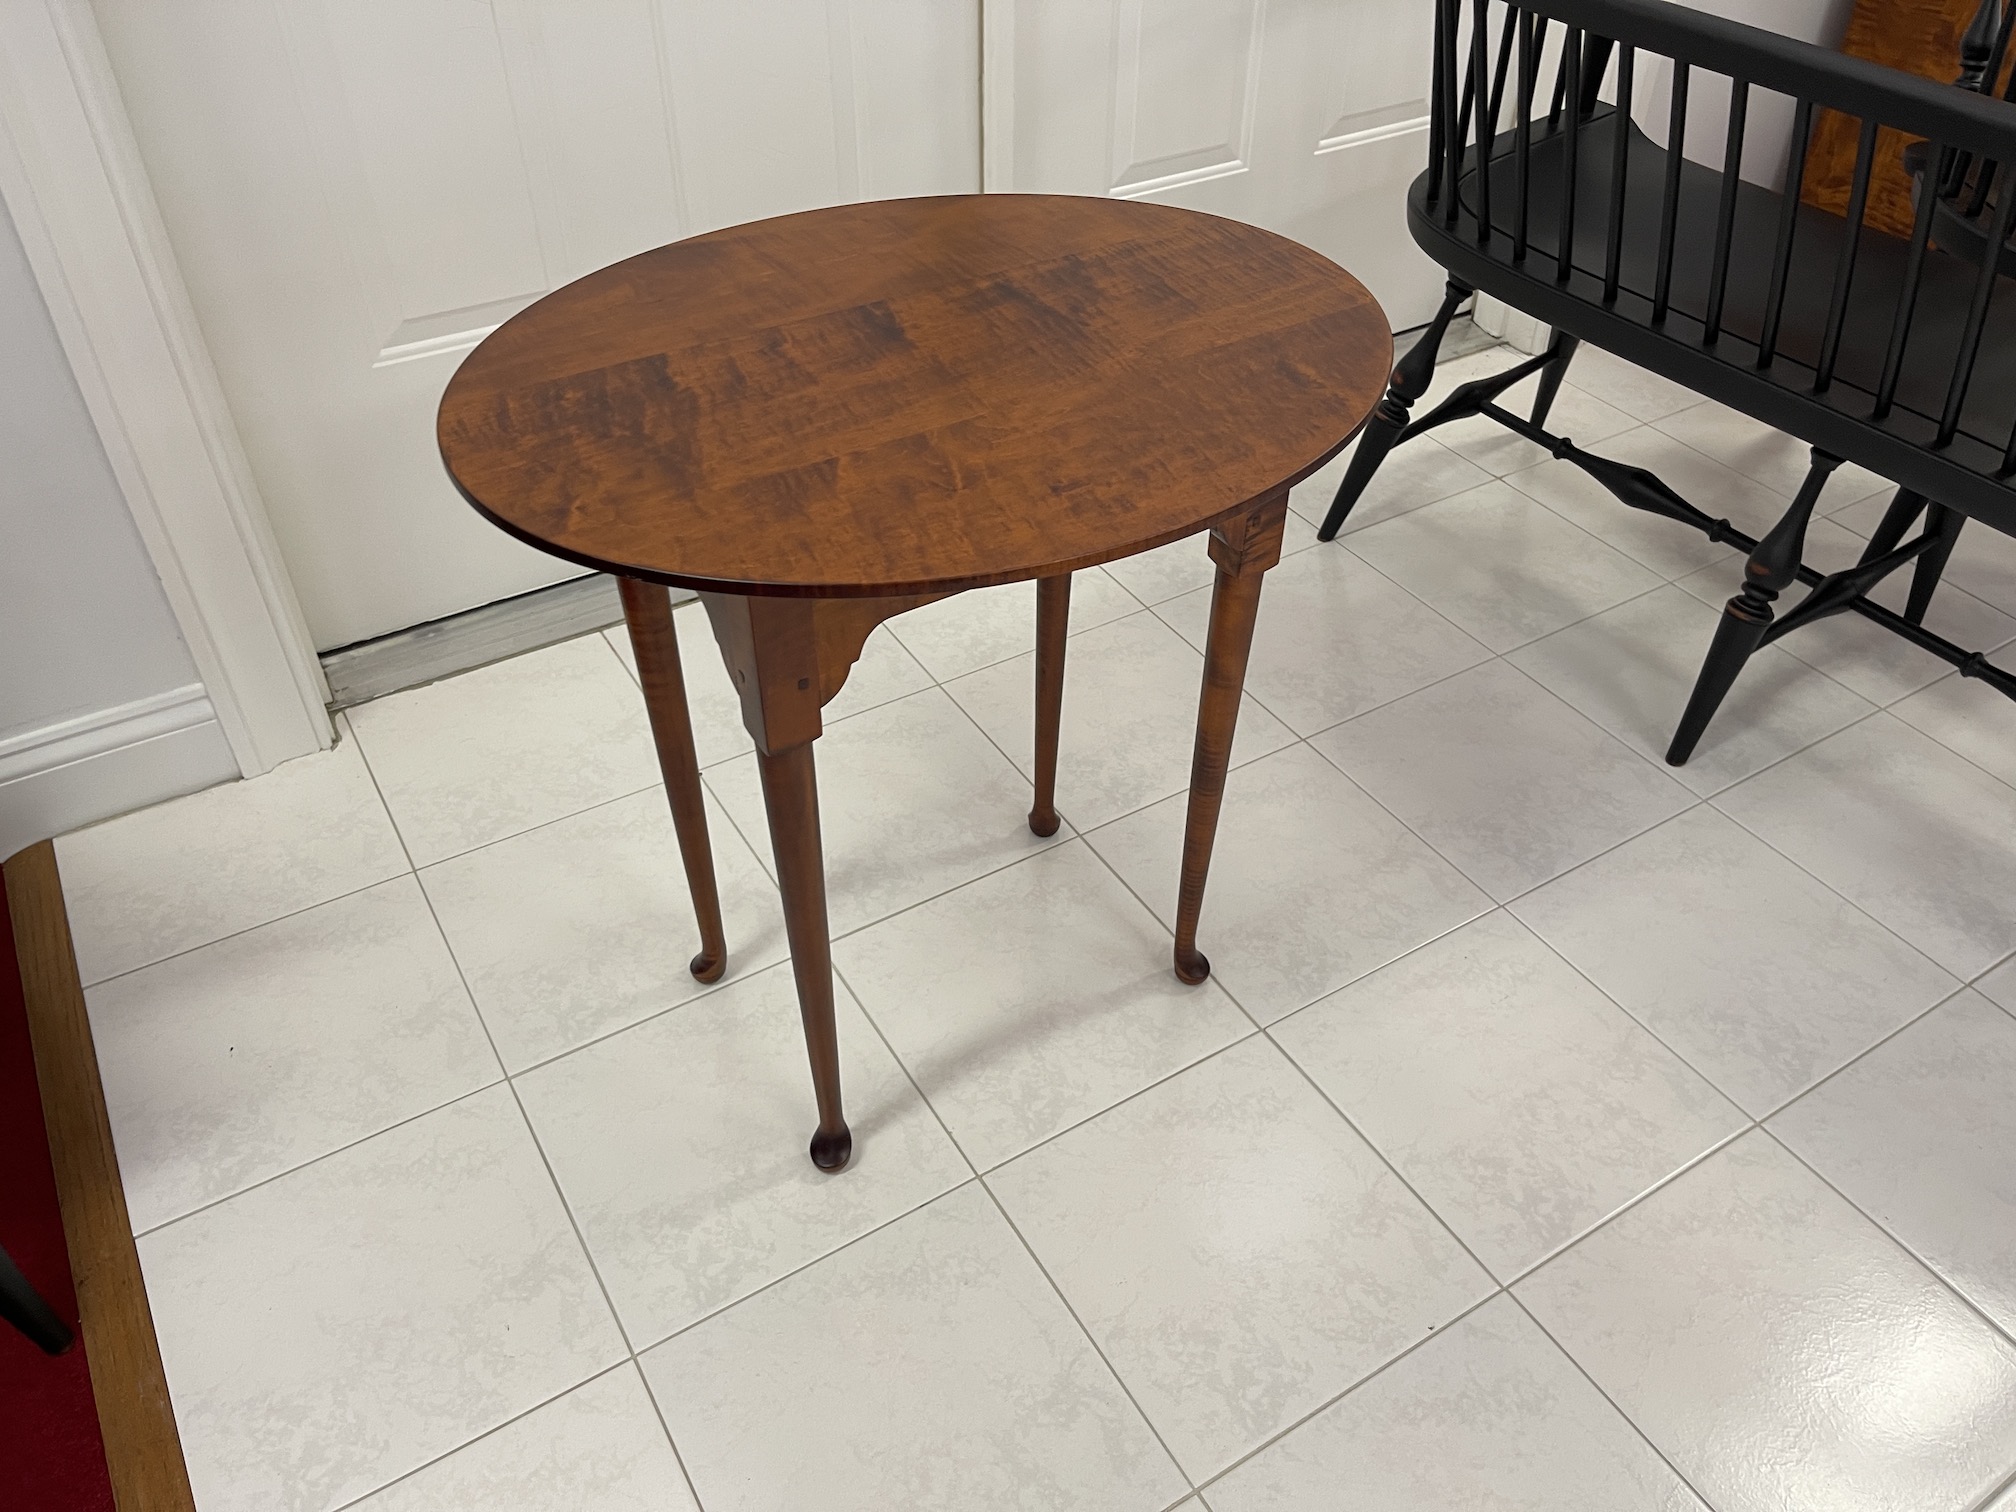 Tiger Maple Wood Oval Queen Anne Tea Table - New Model Image